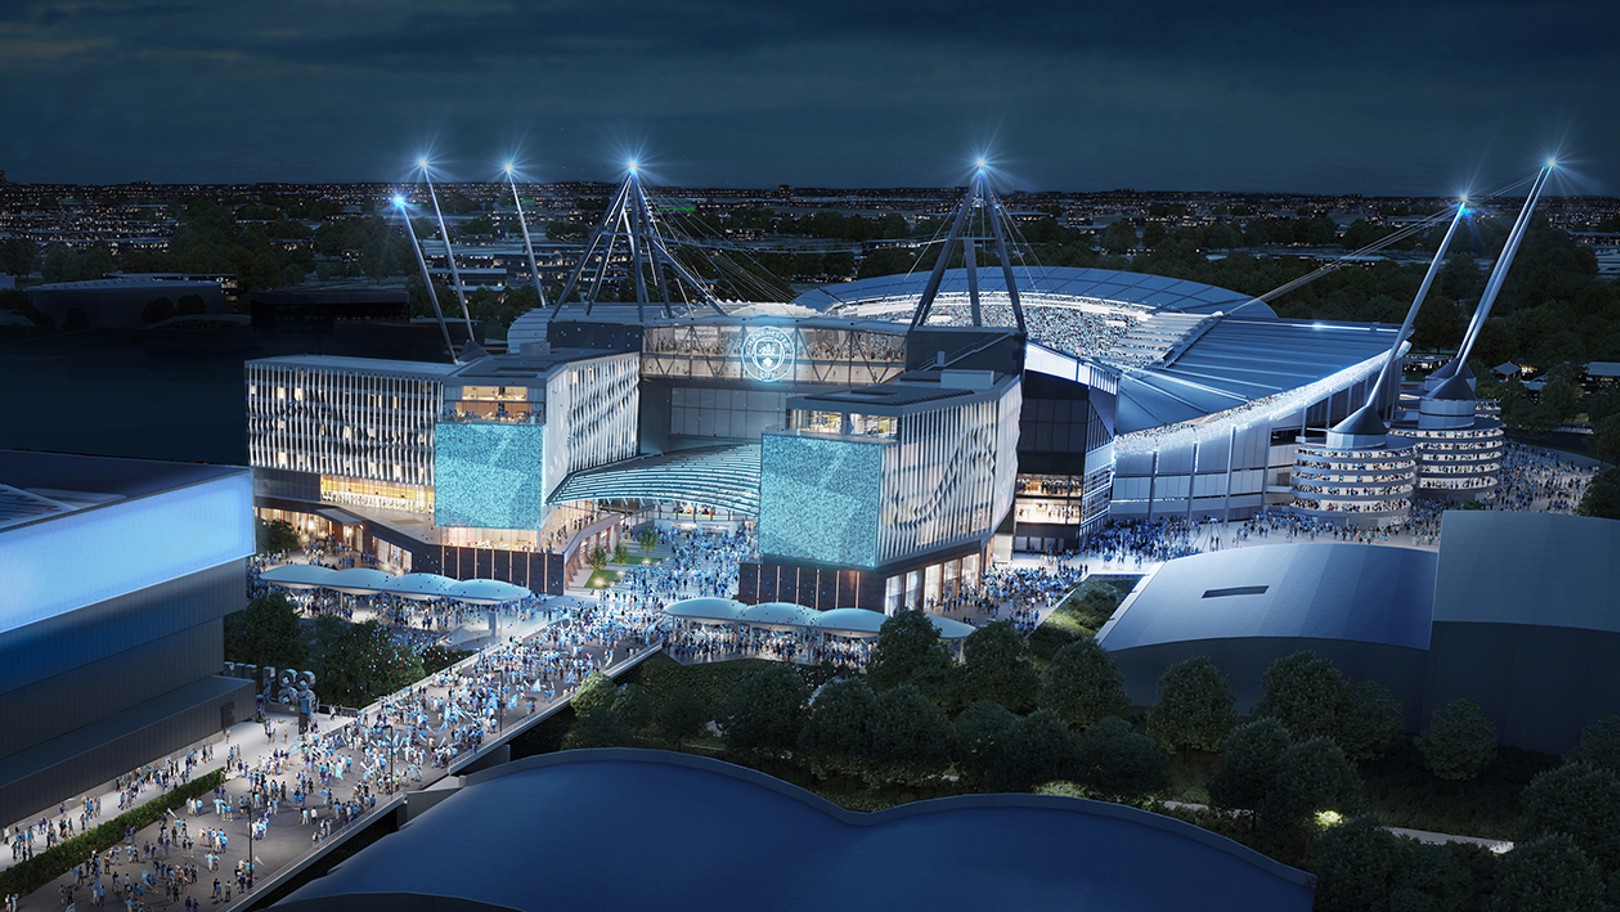 Manchester City's planning application for an entertainment destination at the Etihad Stadium receives approval